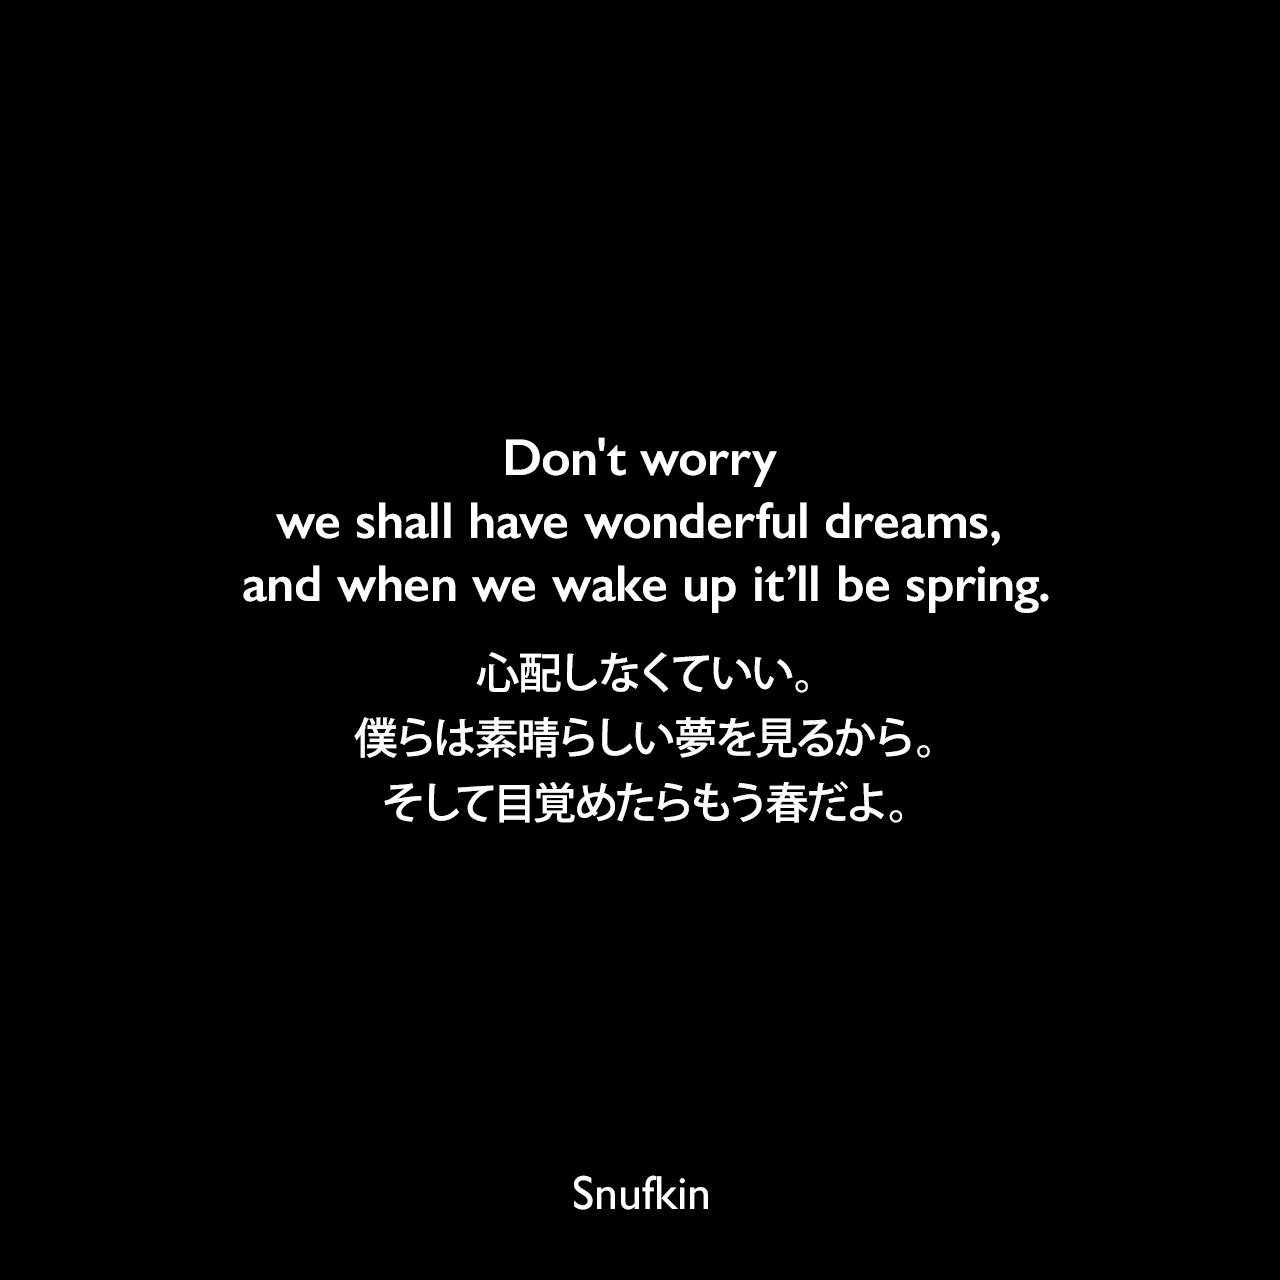 Don’t worry we shall have wonderful dreams, and when we wake up it’ll be spring.心配しなくていい。僕らは素晴らしい夢を見るから。そして目覚めたらもう春だよ。- トーベ・ヤンソンによる本「たのしいムーミン一家」より